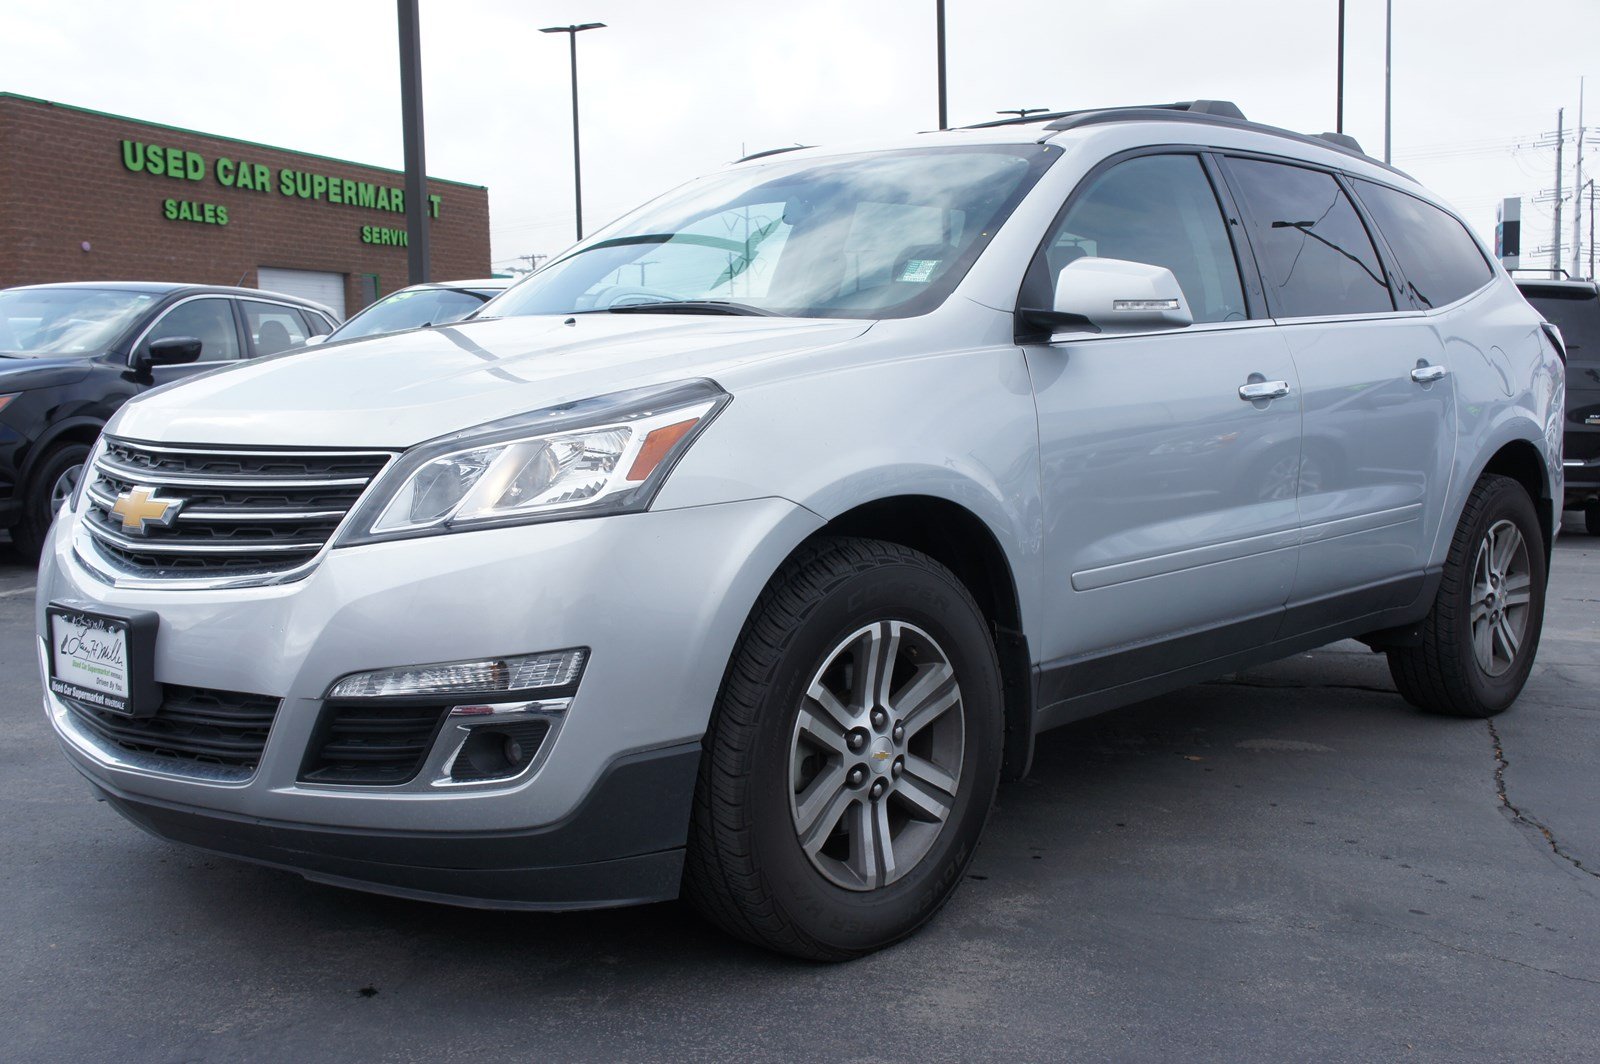 PreOwned 2017 Chevrolet Traverse LT Sport Utility in Sandy S5300